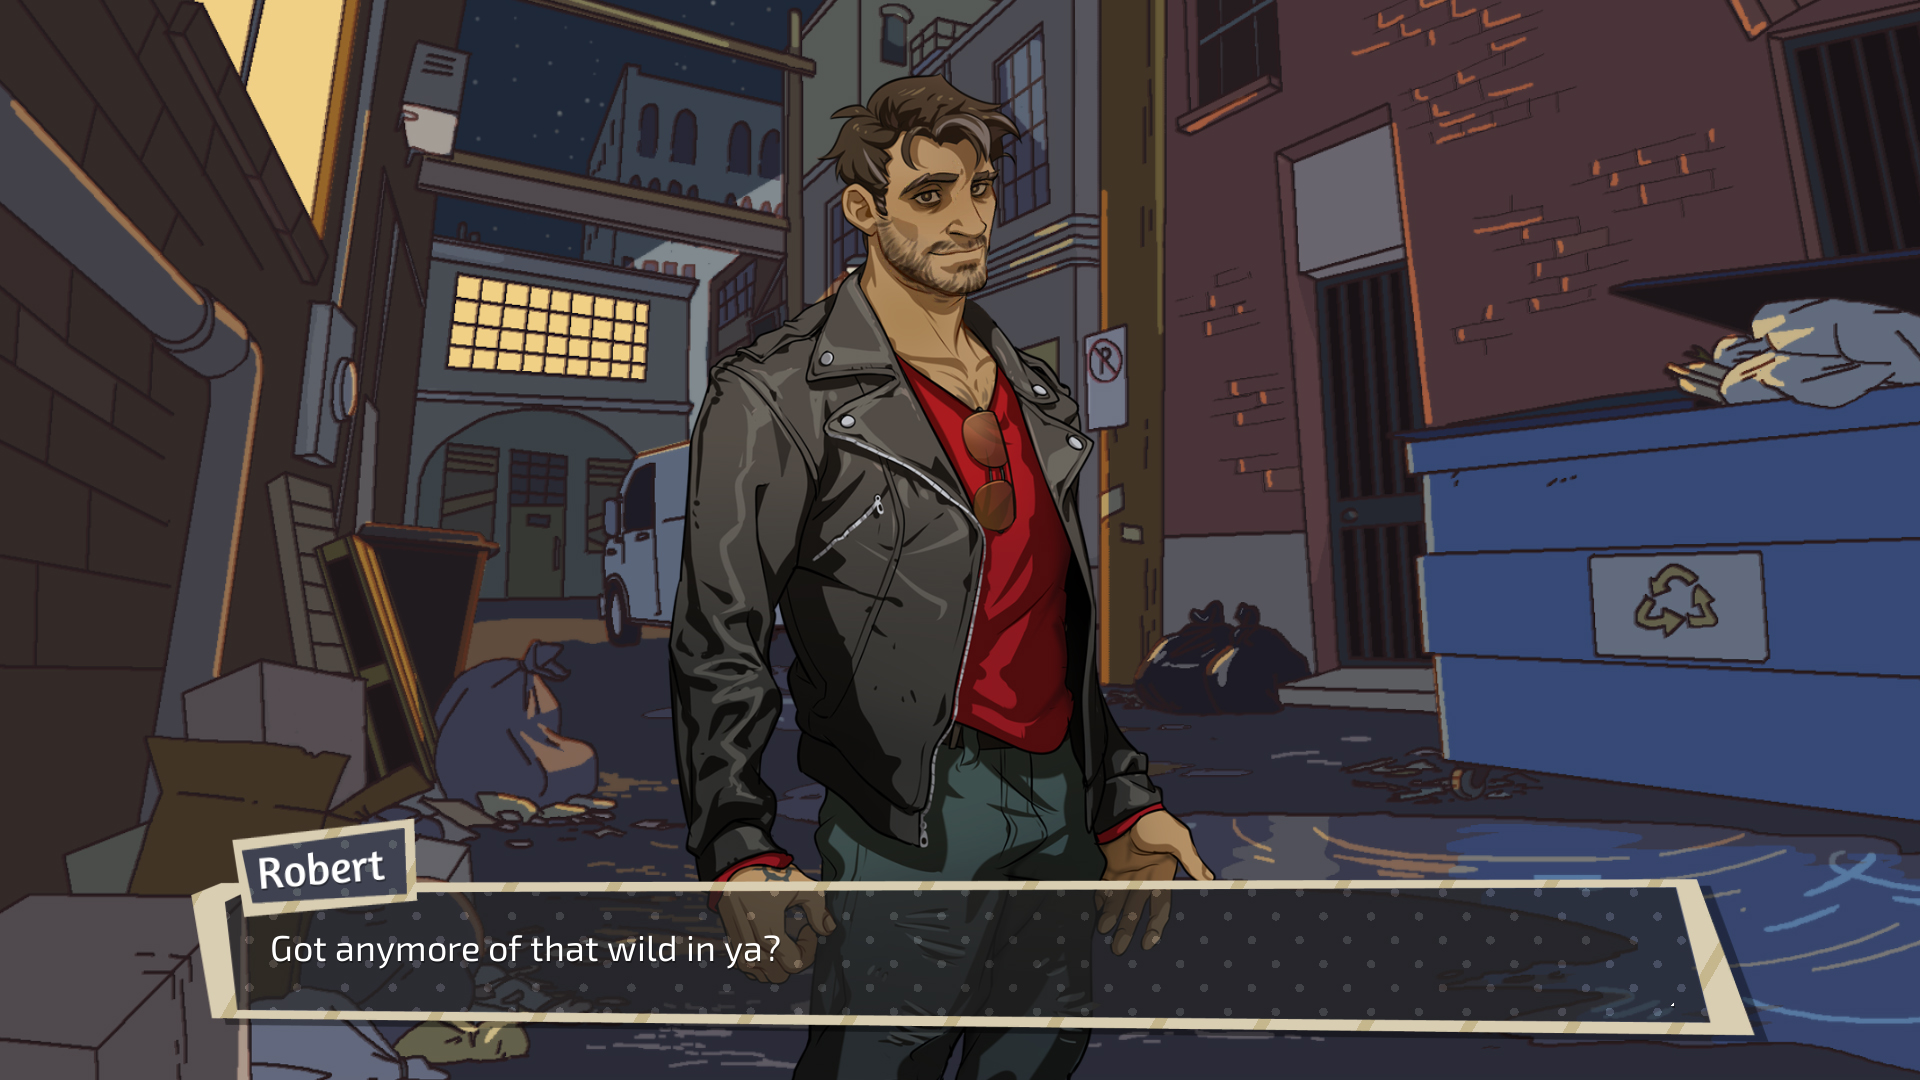 Dating Sim Android